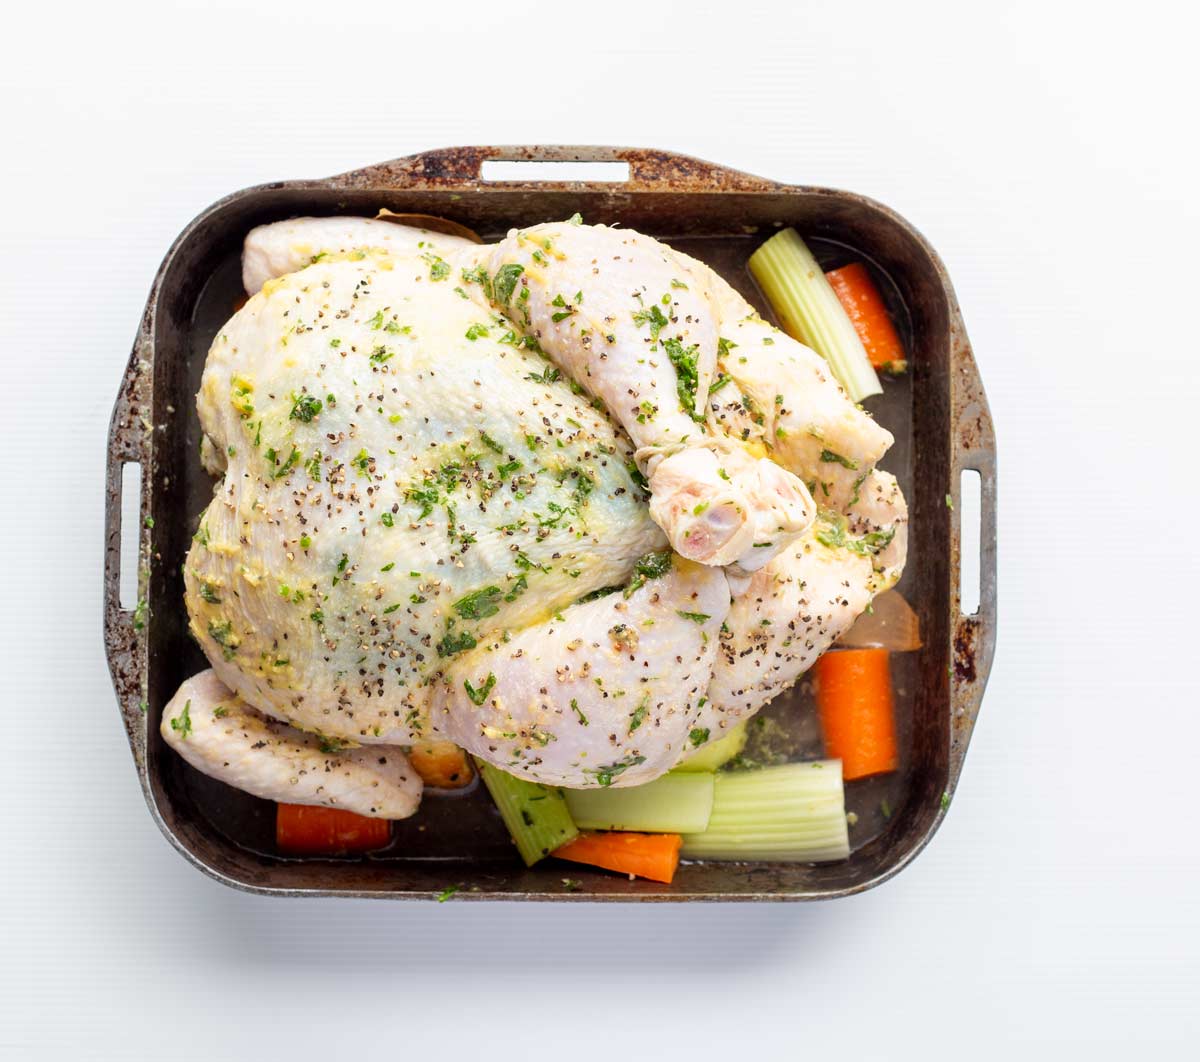 a raw chicken in a roasting dish with veg underneath